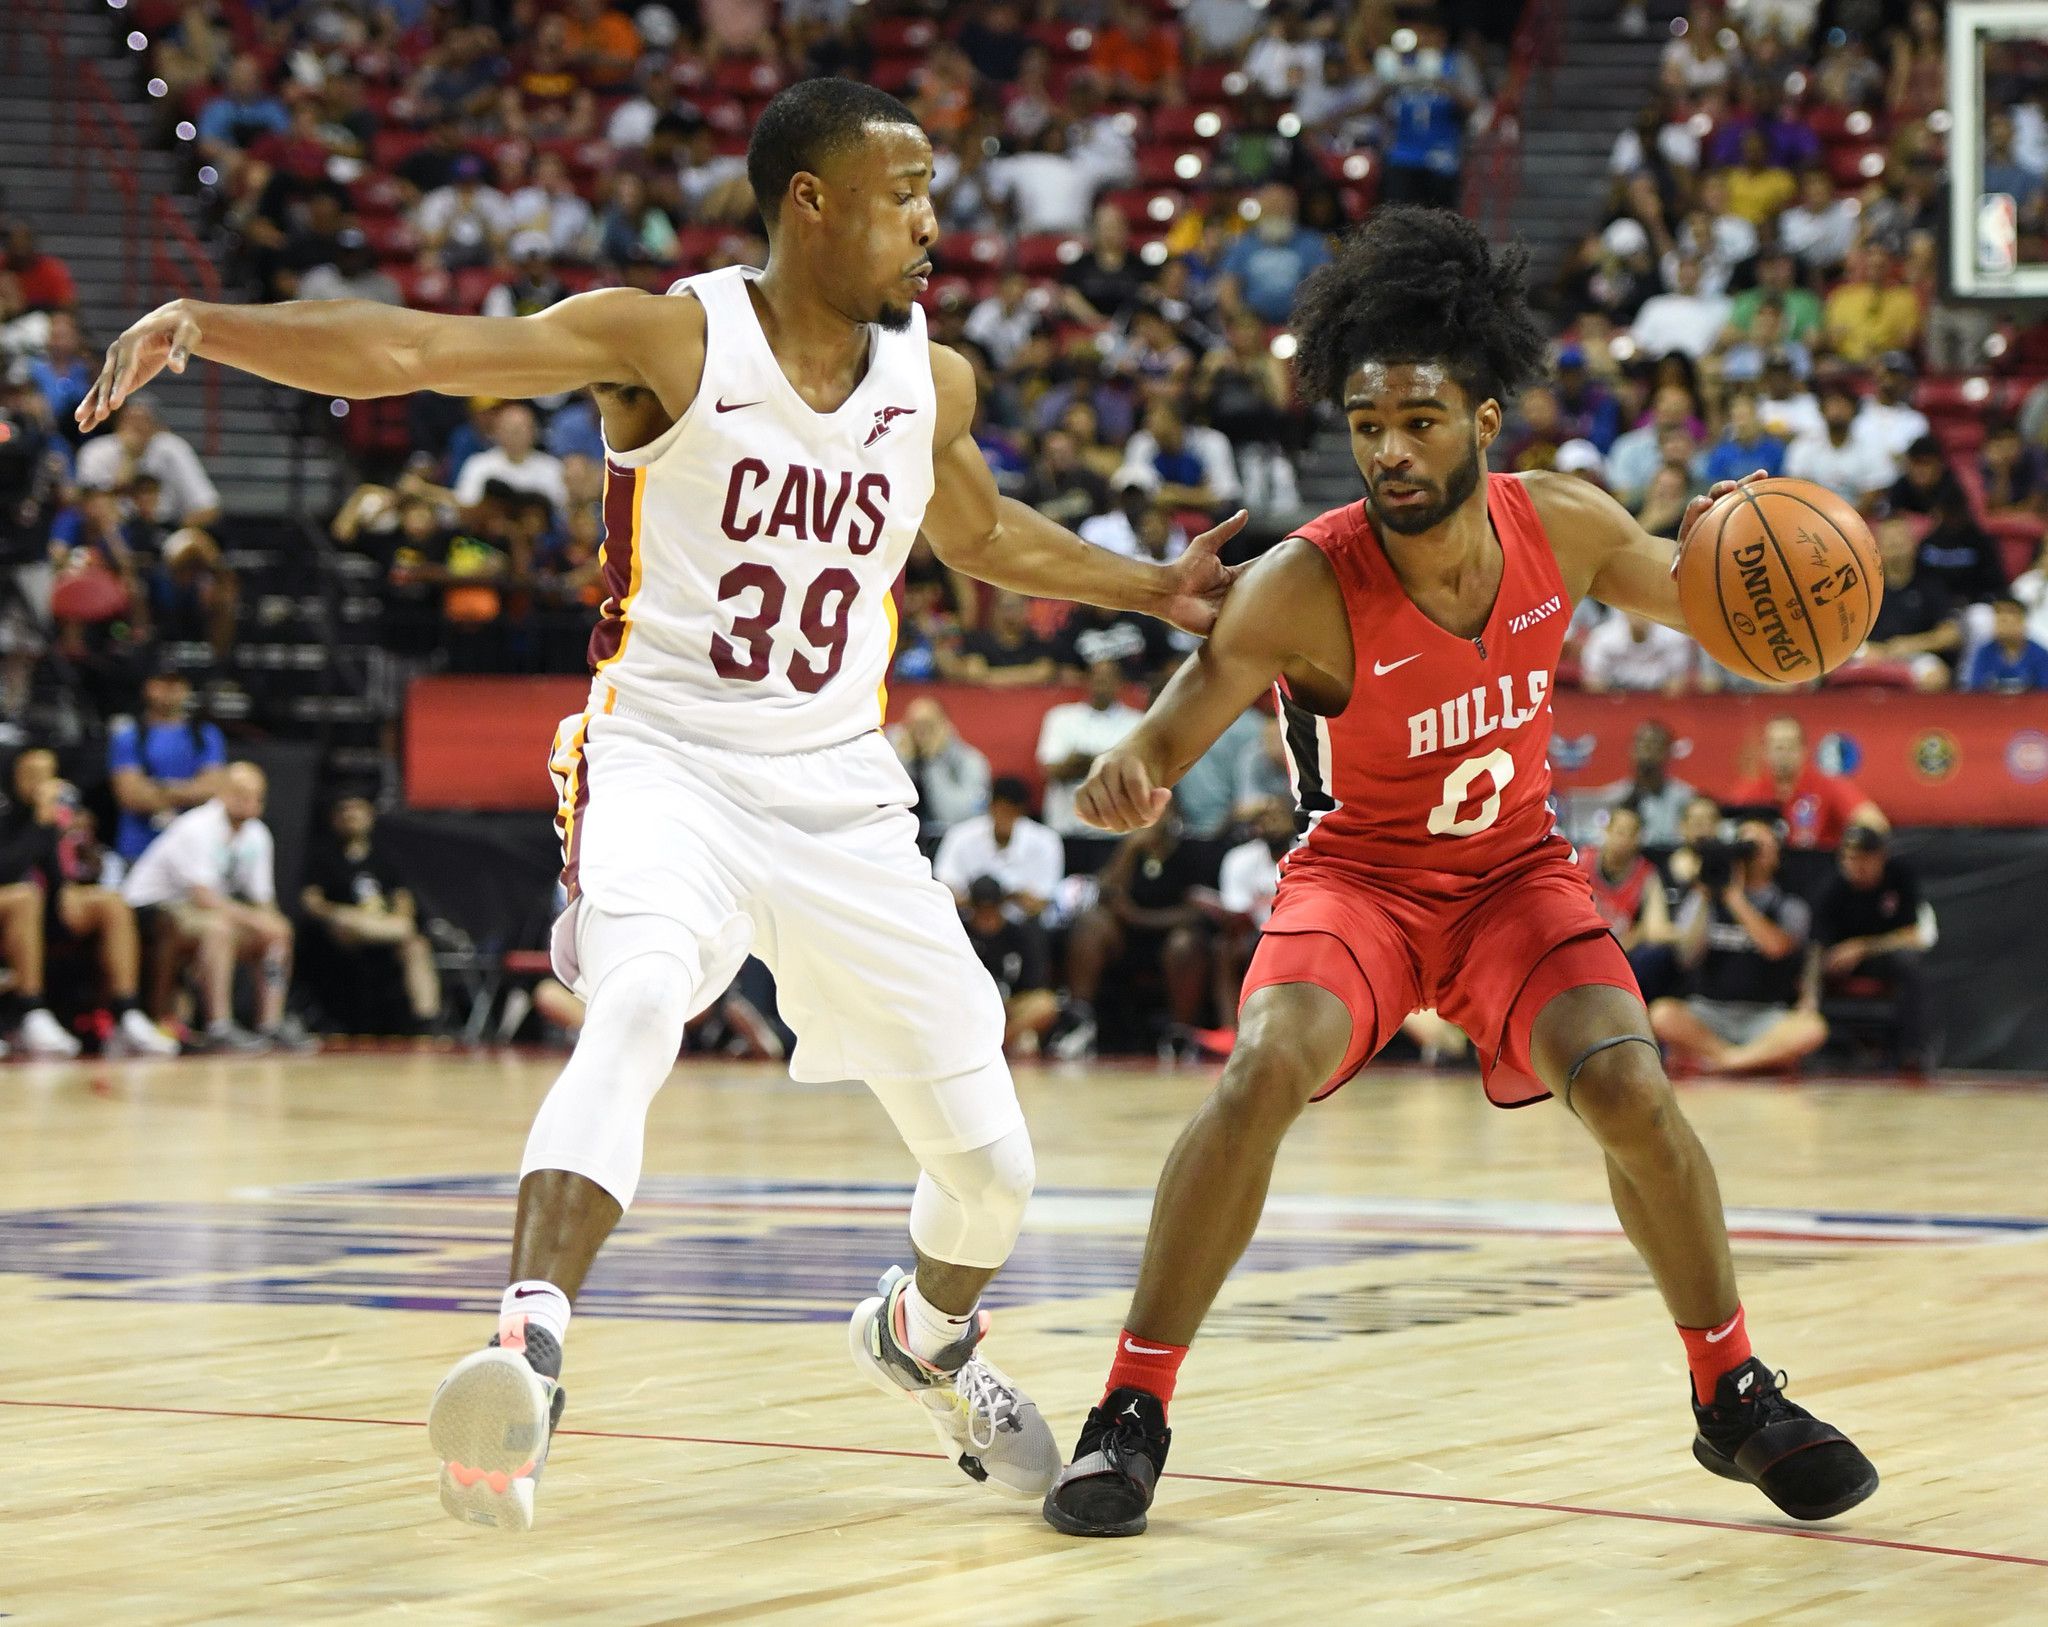 More on Coby White, Chicago Bulls' third-year guard – NBC Sports Chicago